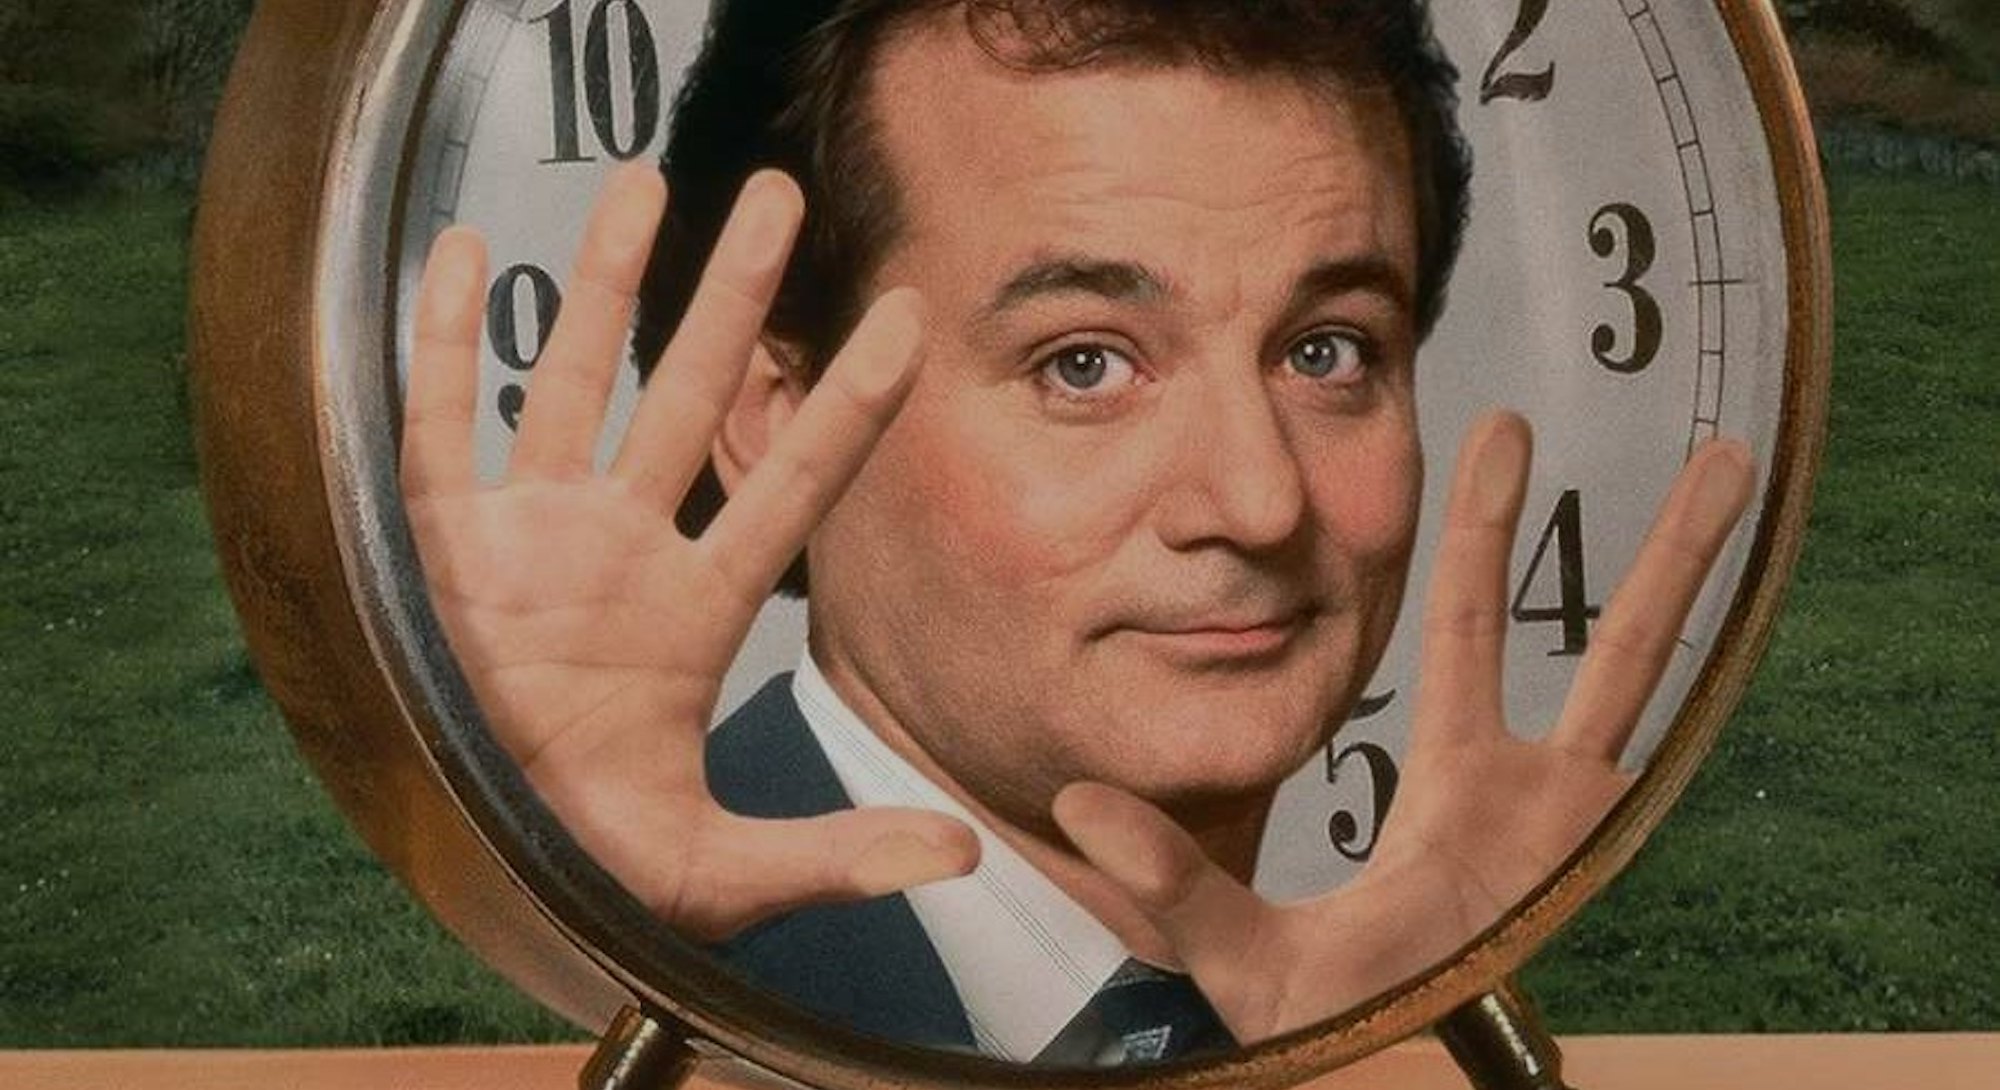 poster art for Groundhog Day movie